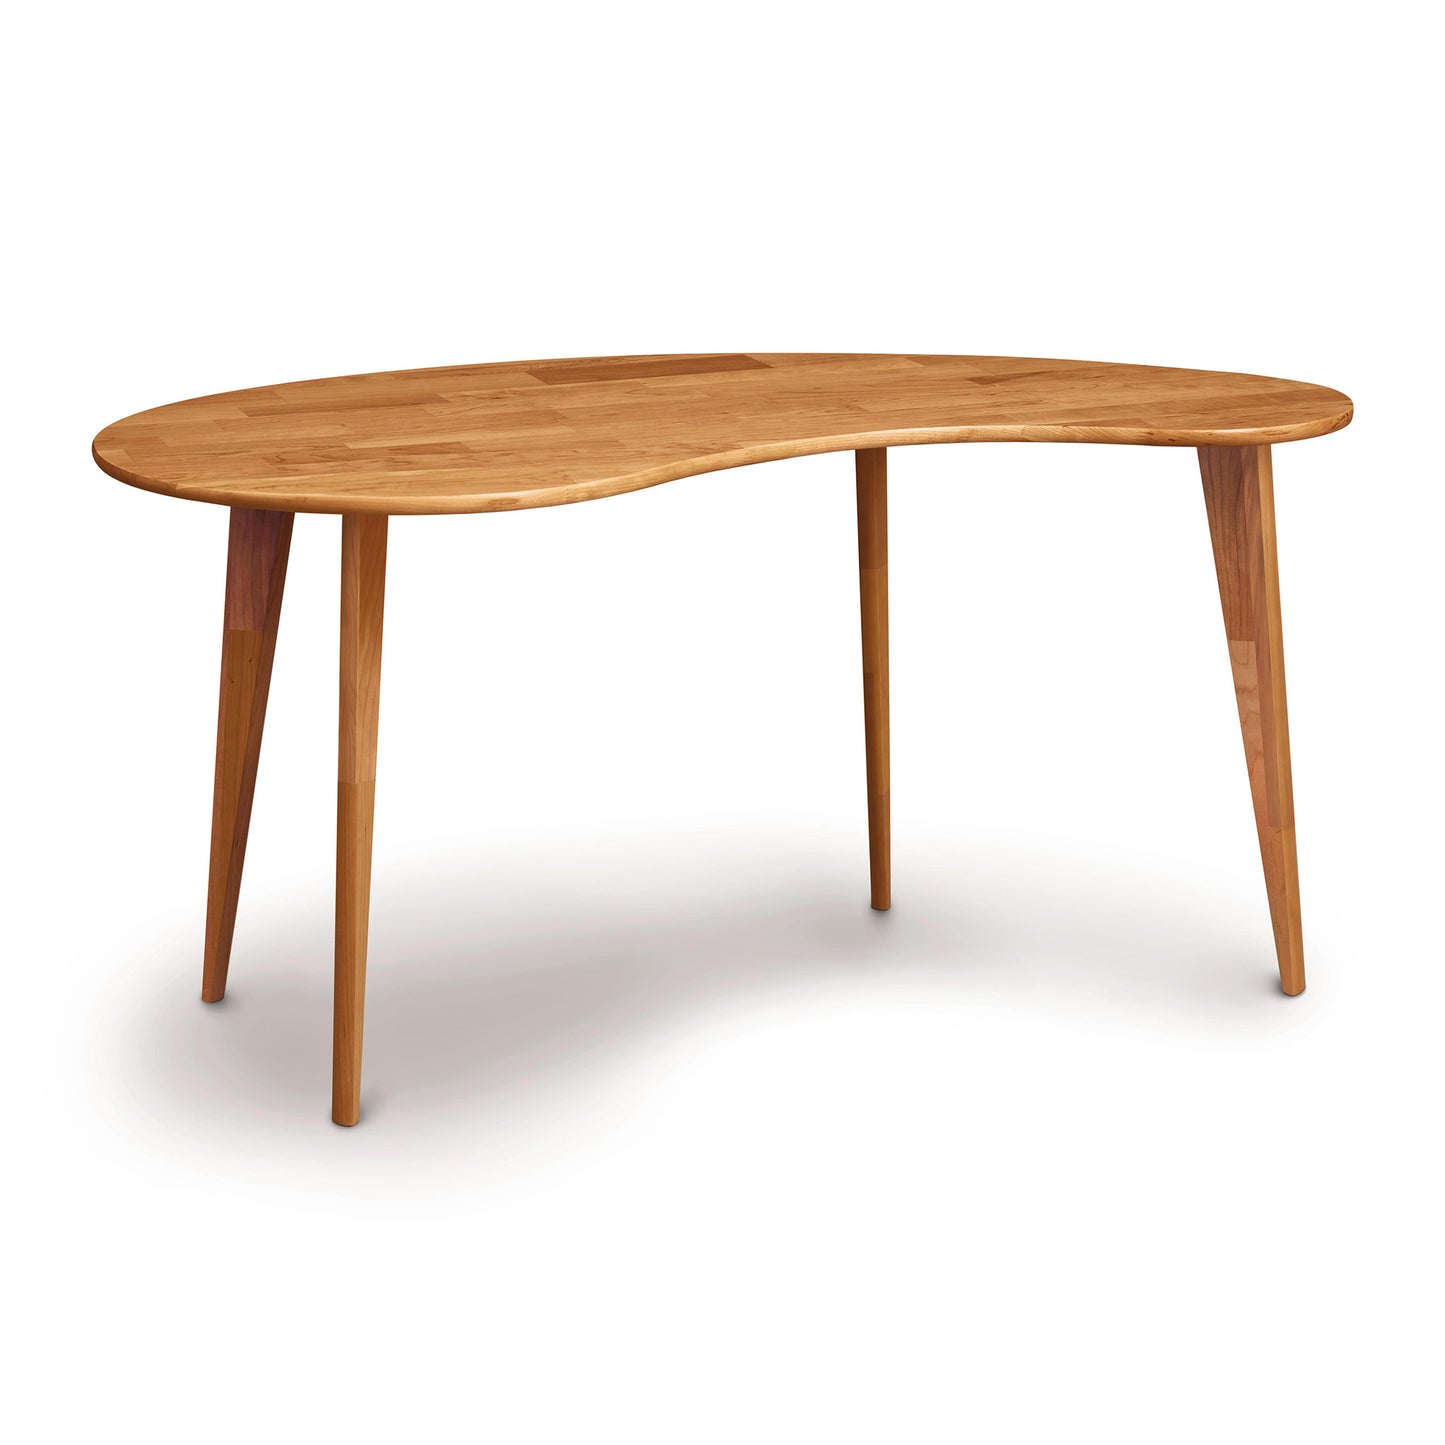 A natural hardwood Essentials Kidney Shaped Desk with Wood Legs by Copeland Furniture isolated on a white background.